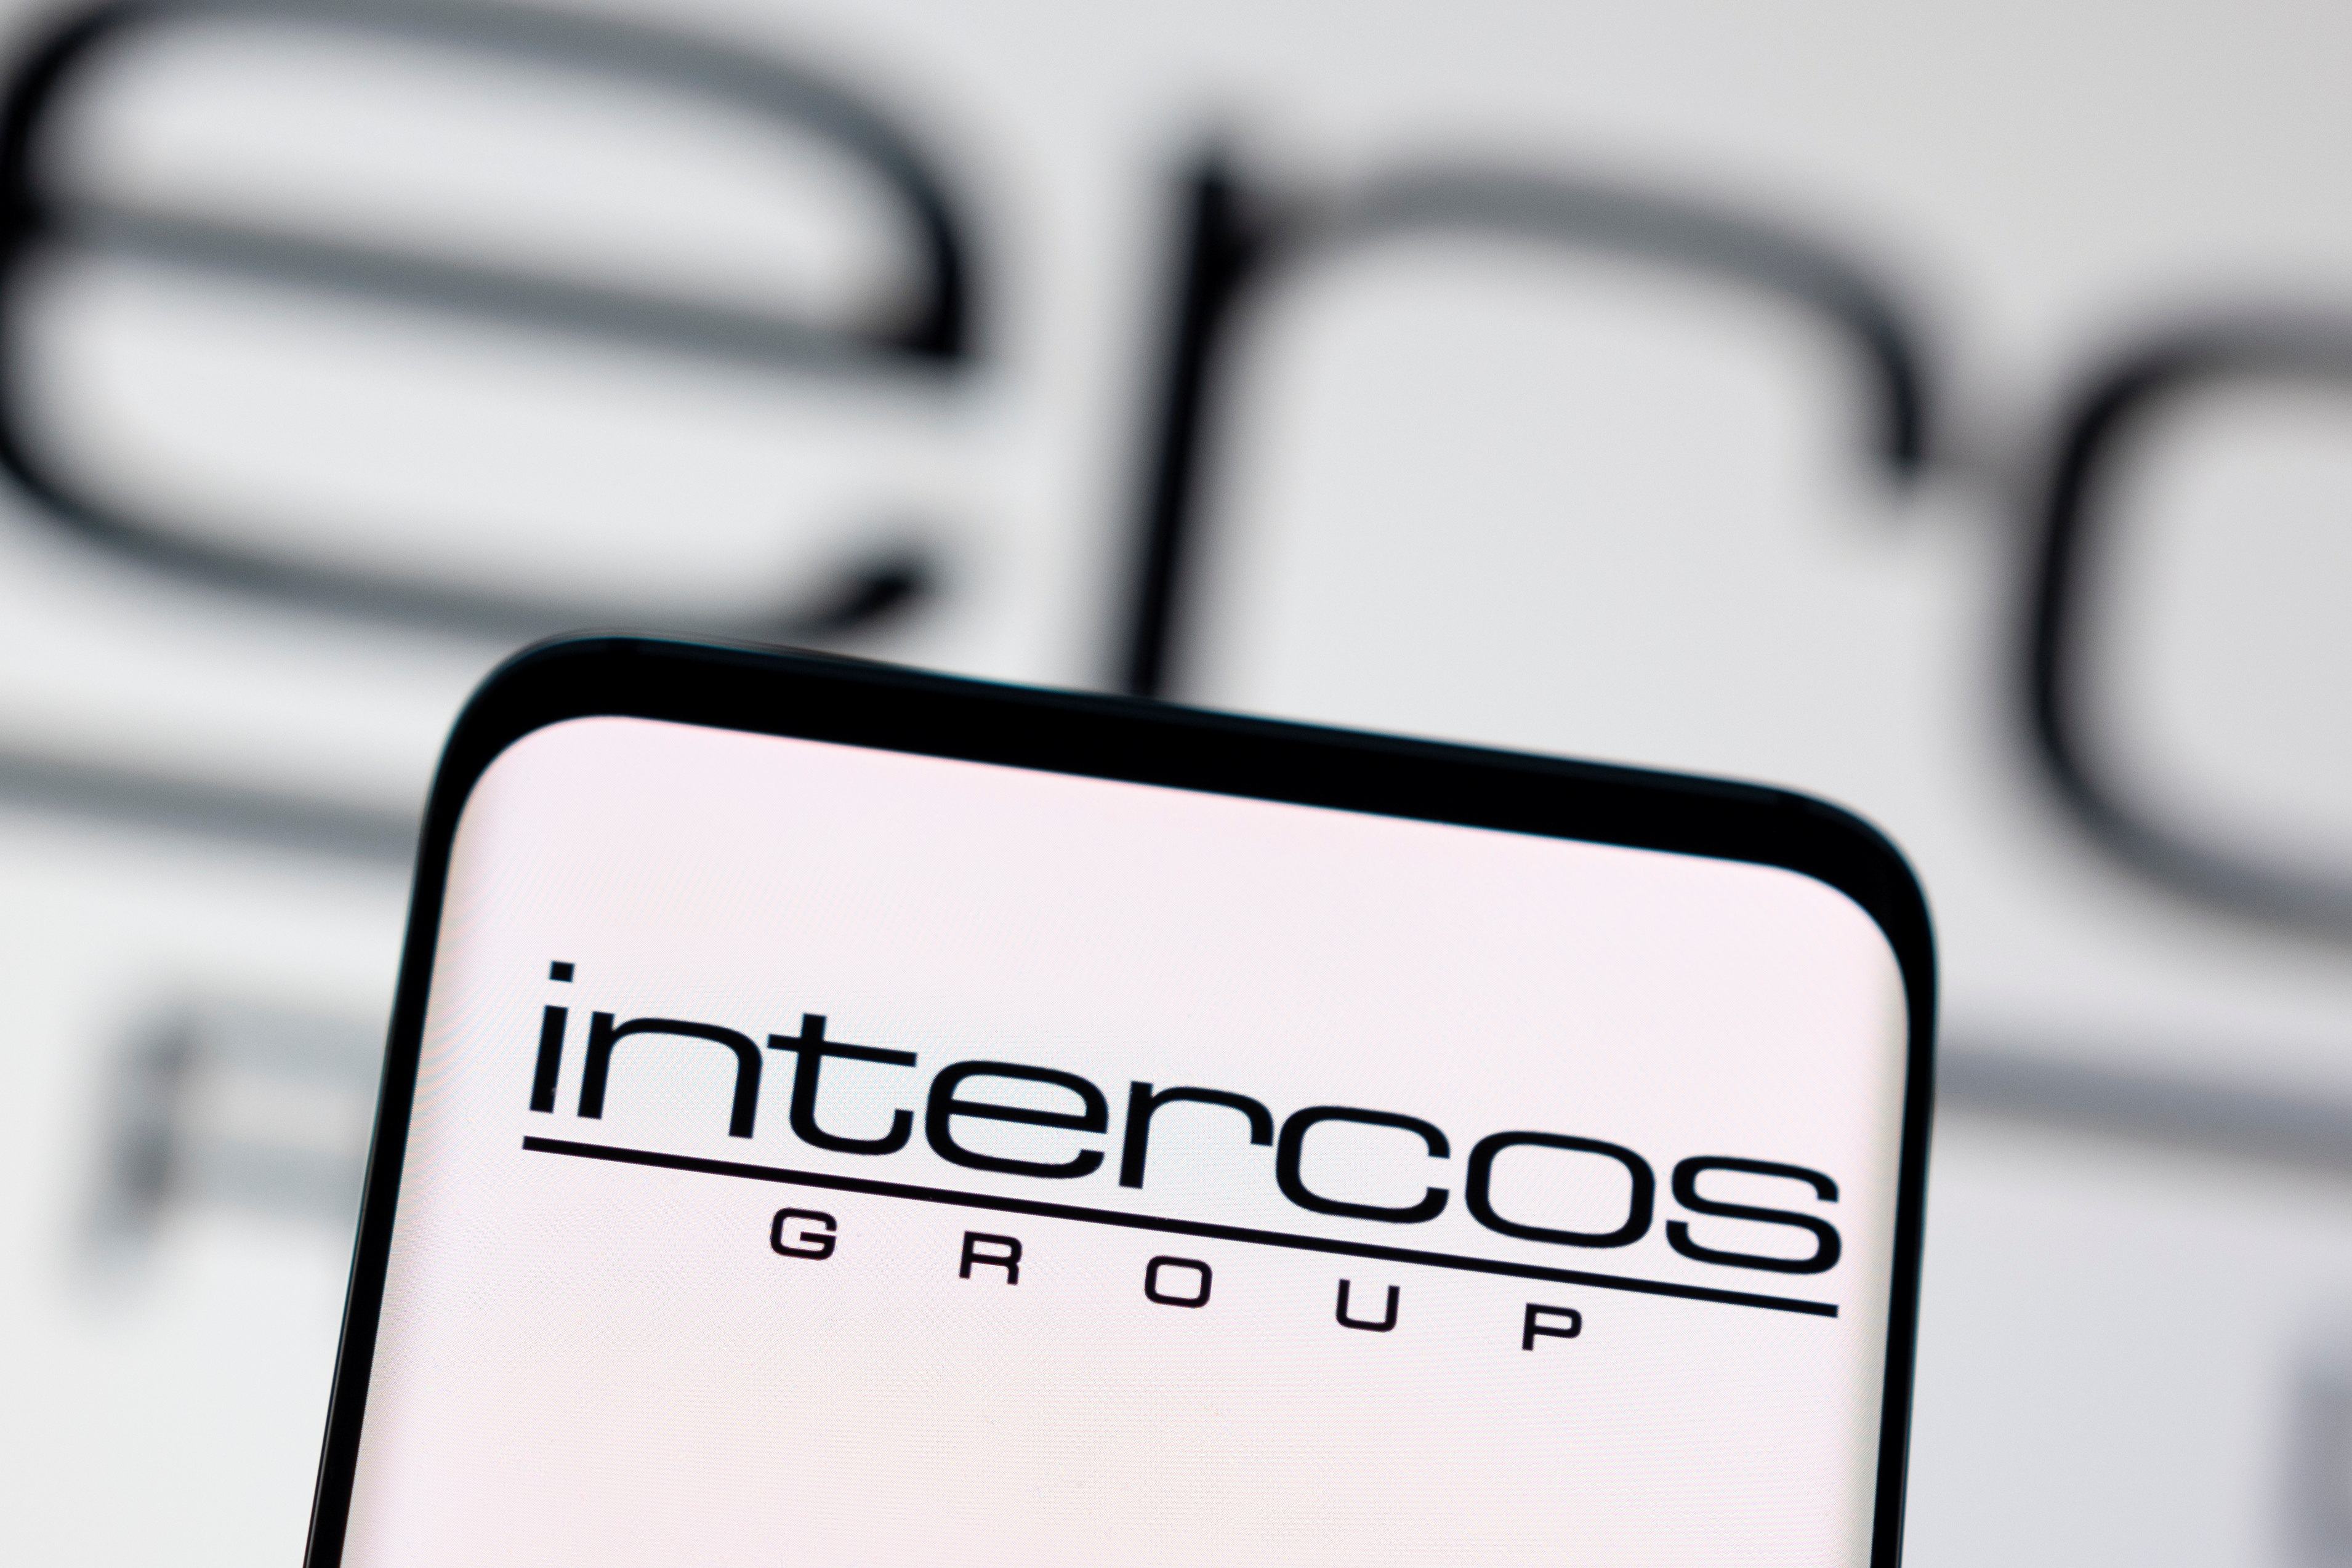 Intercos fund shareholders L Catterton, OTPP sell 6% stake at 7% discount